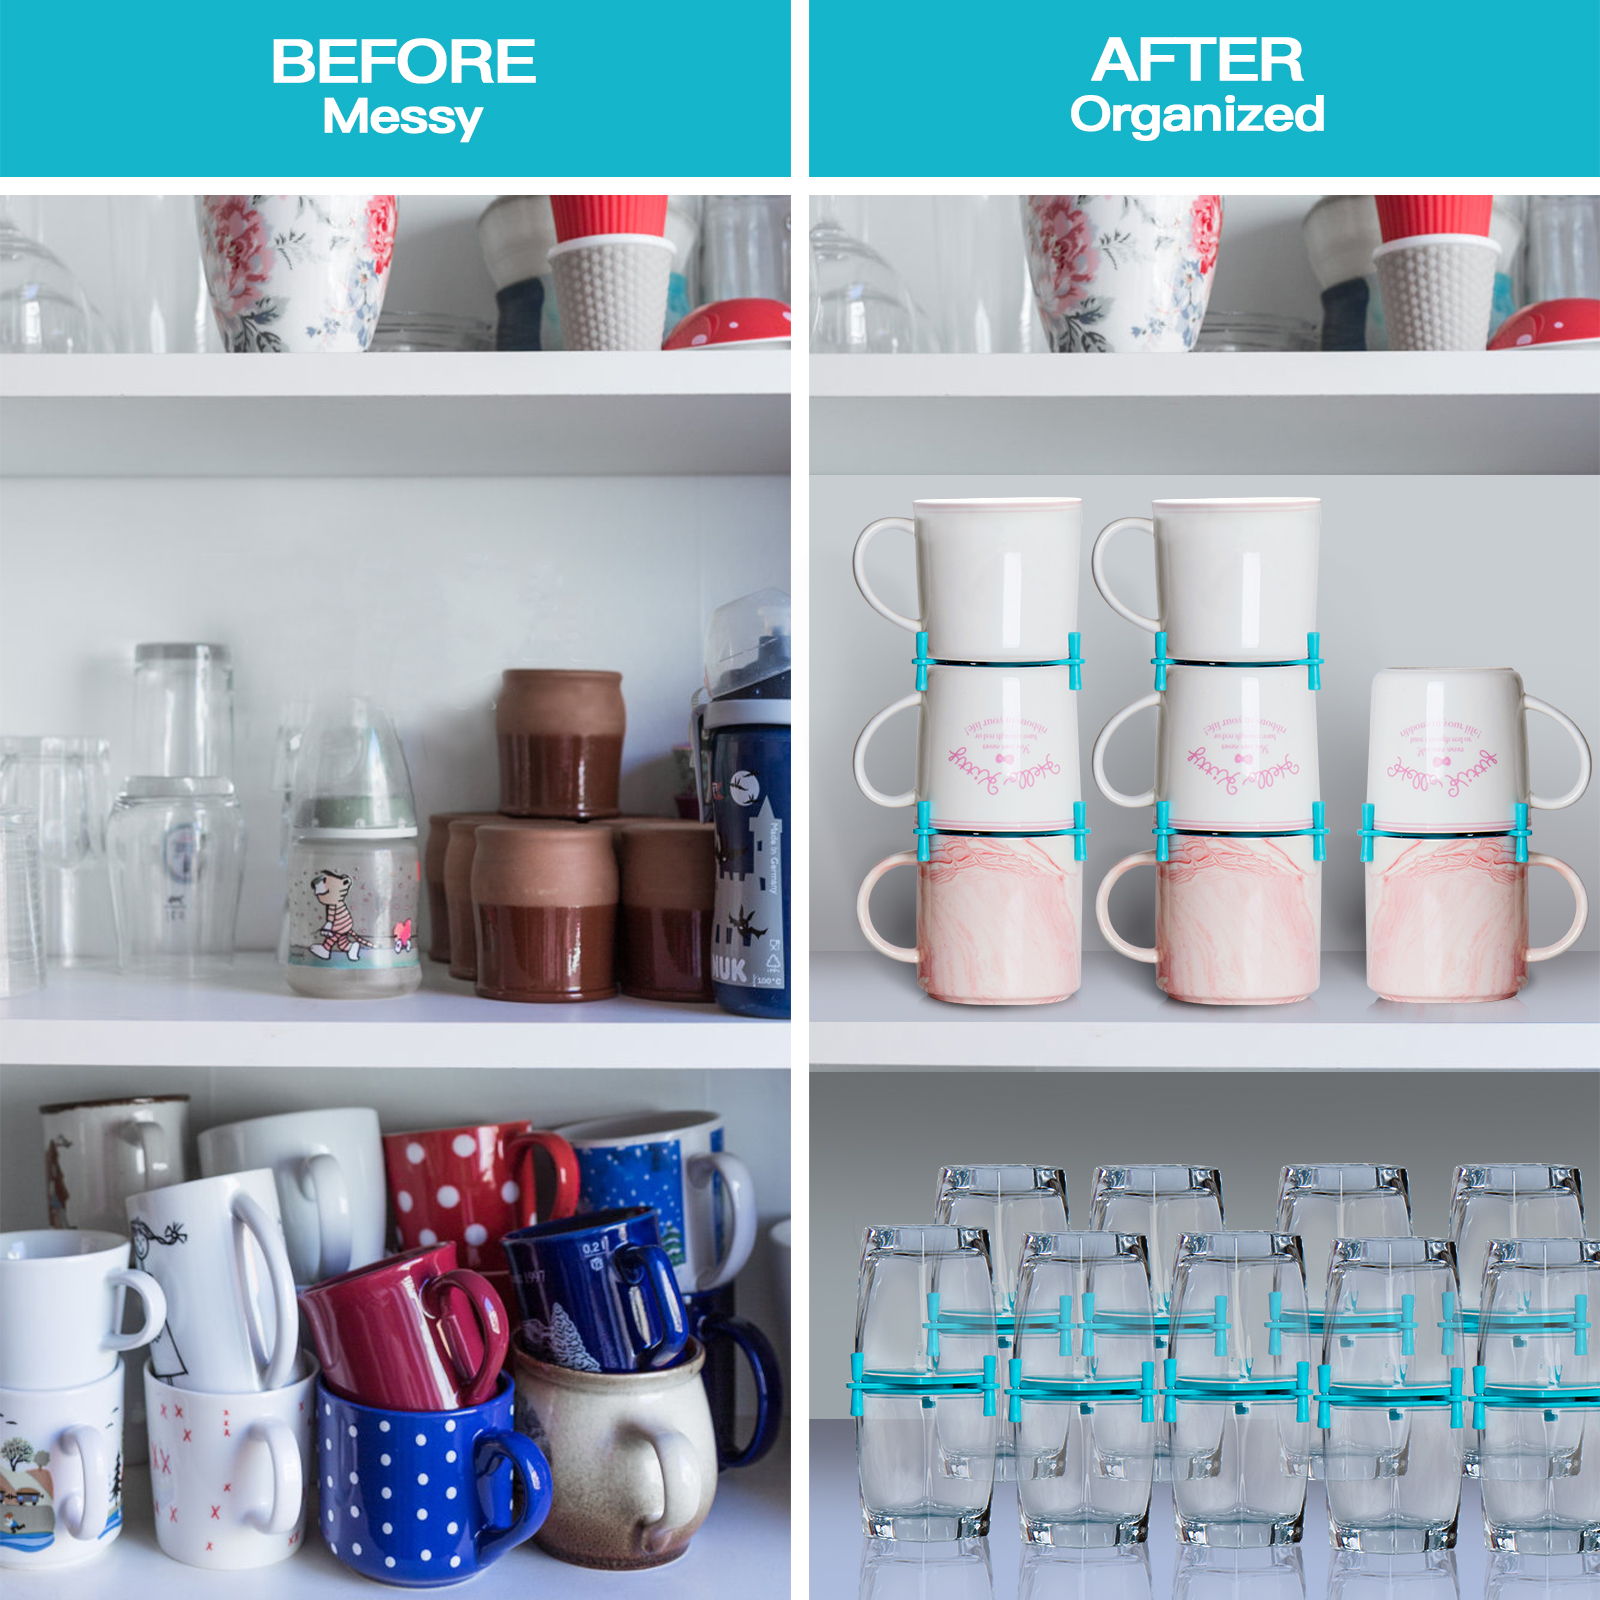 How to Organize Mugs: 9 Ways to Store Your Mug Collection